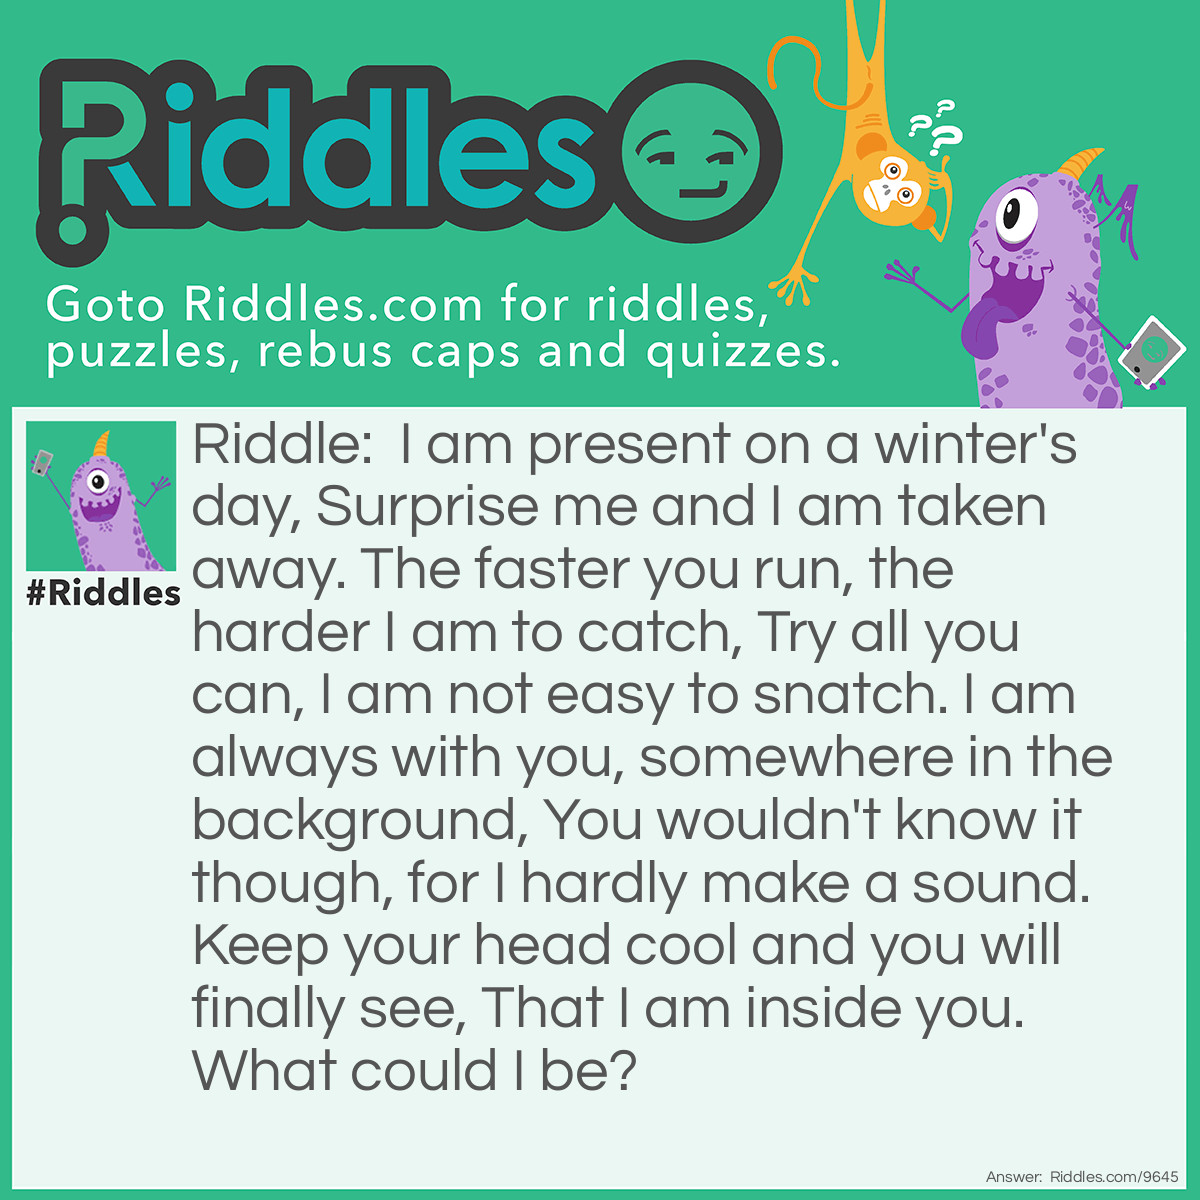 Riddle: I am present on a winter's day, Surprise me and I am taken away. The faster you run, the harder I am to catch, Try all you can, I am not easy to snatch. I am always with you, somewhere in the background, You wouldn't know it though, for I hardly make a sound. Keep your head cool and you will finally see, That I am inside you. What could I be? Answer: Your breath.